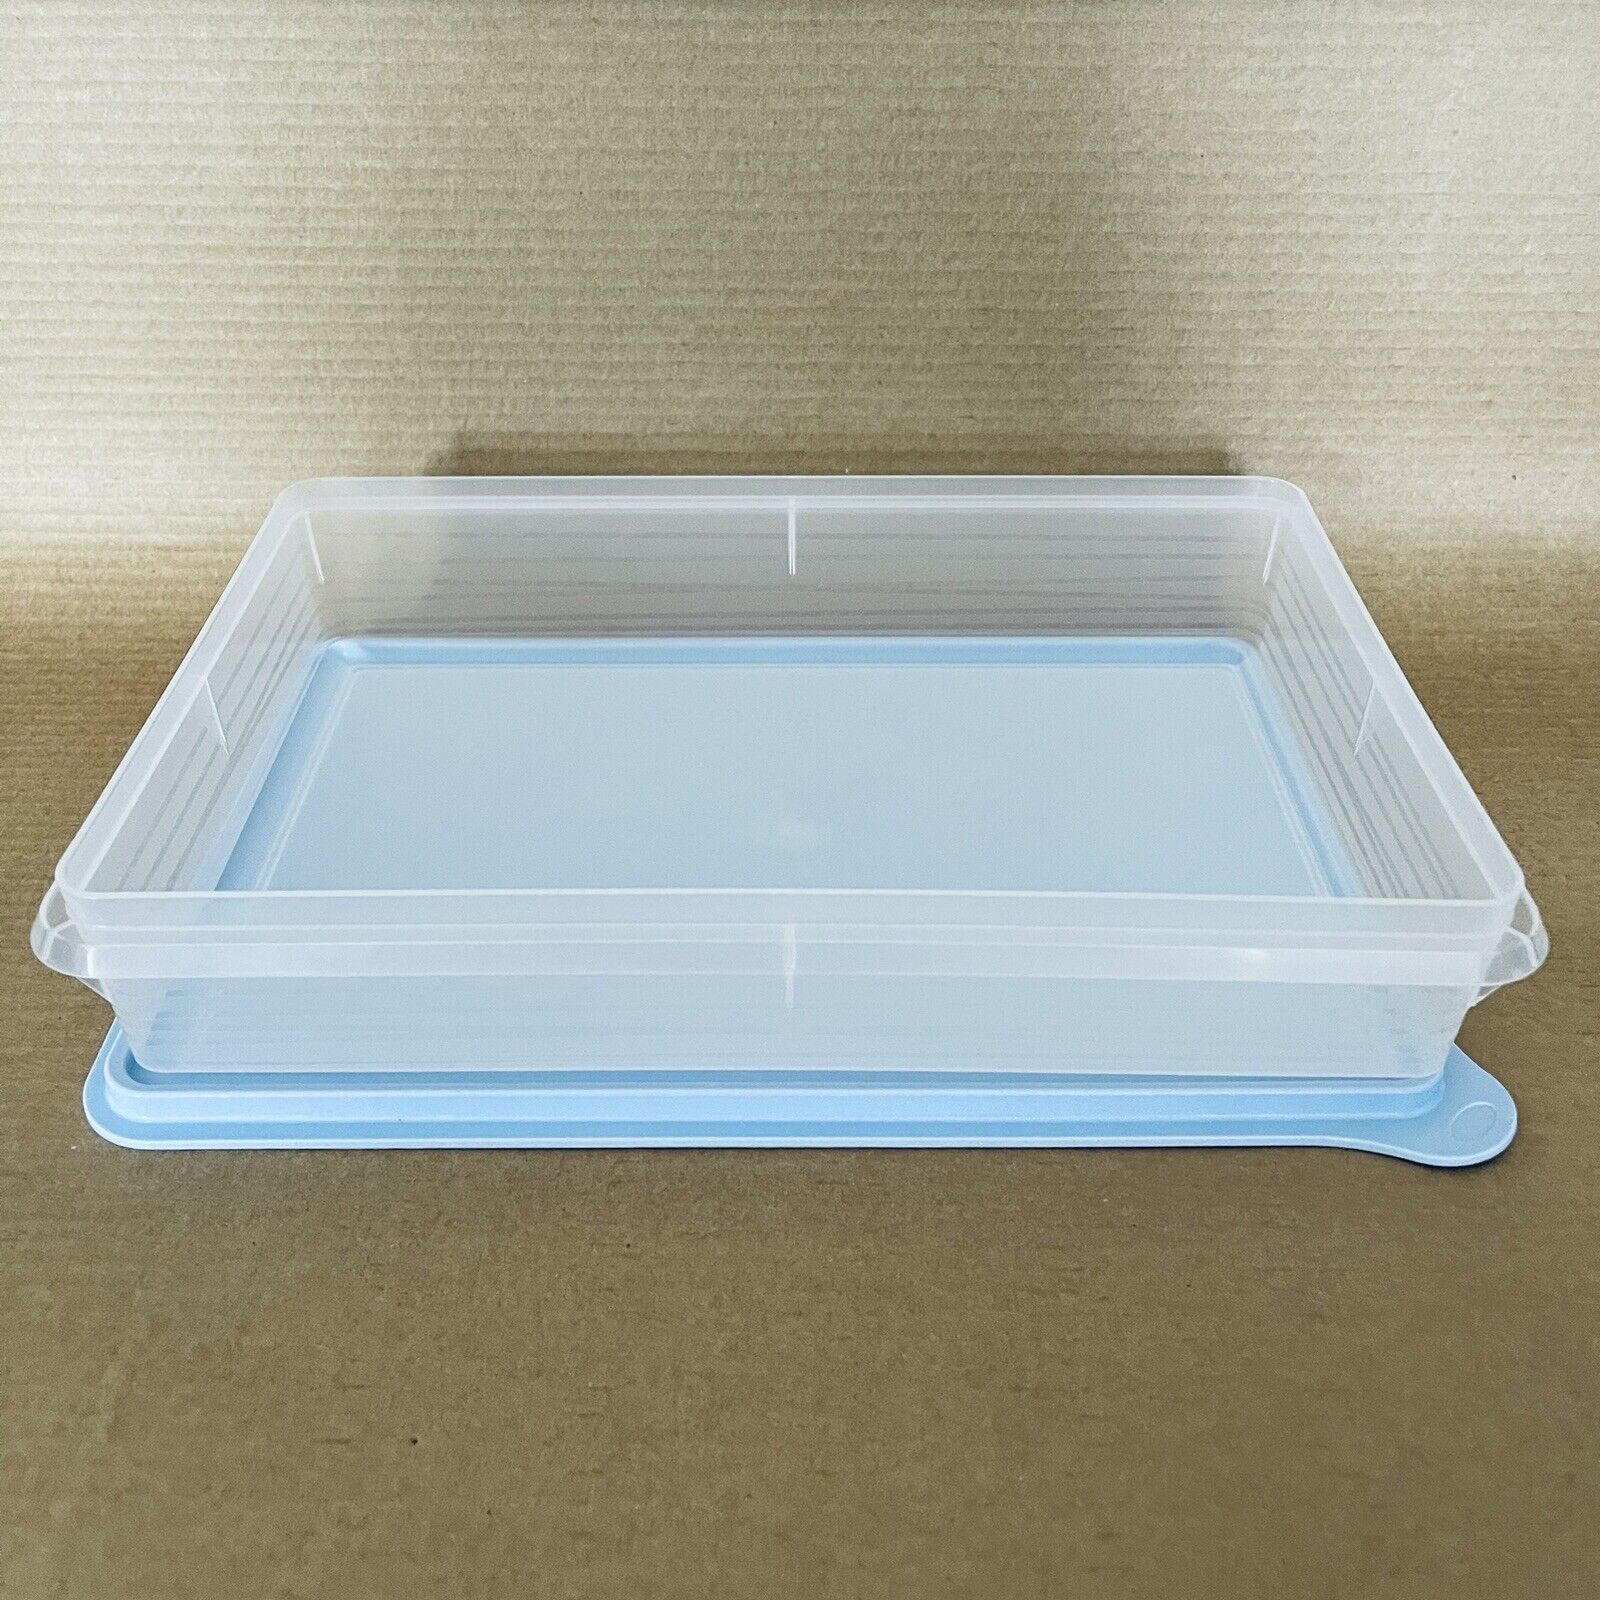 Tupperware Large Snack Stor Rectangular Cold Cut Keeper Container #5346 Ice Blue